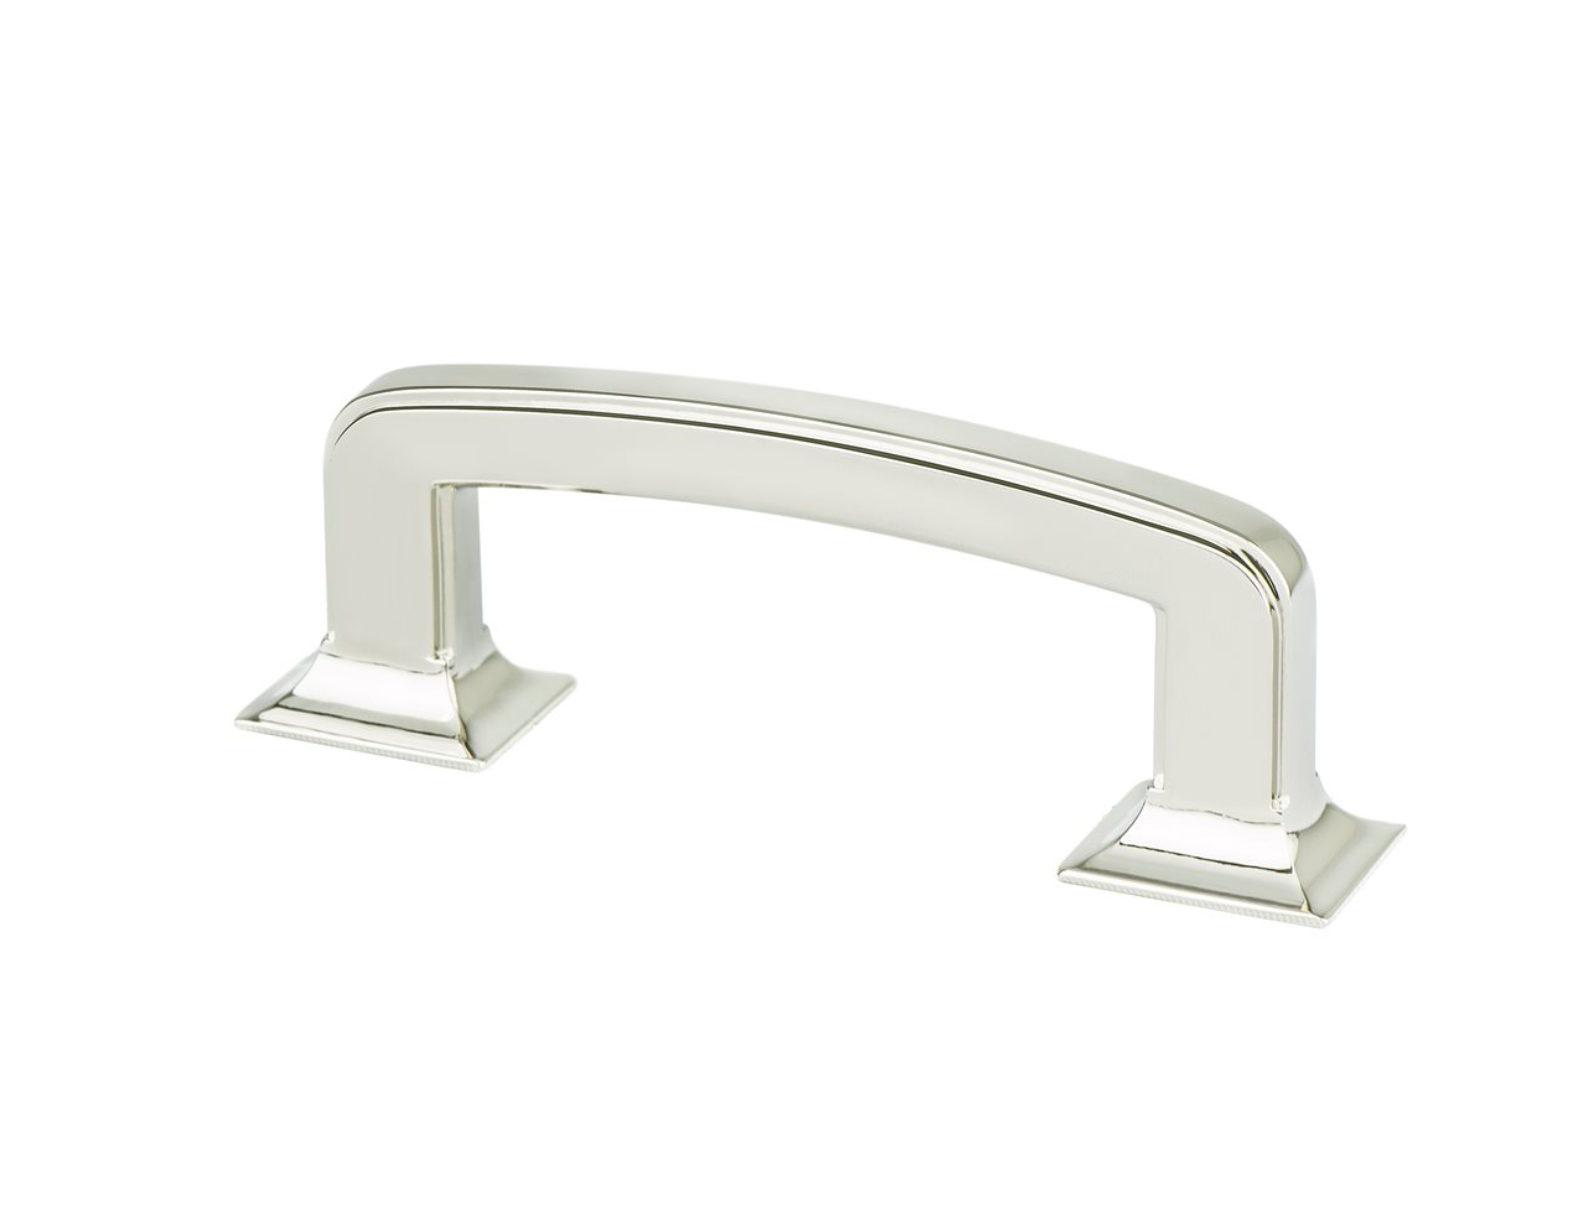 Polished Nickel "Liana" Drawer Pulls and Knobs for Cabinets and Furniture - Industry Hardware